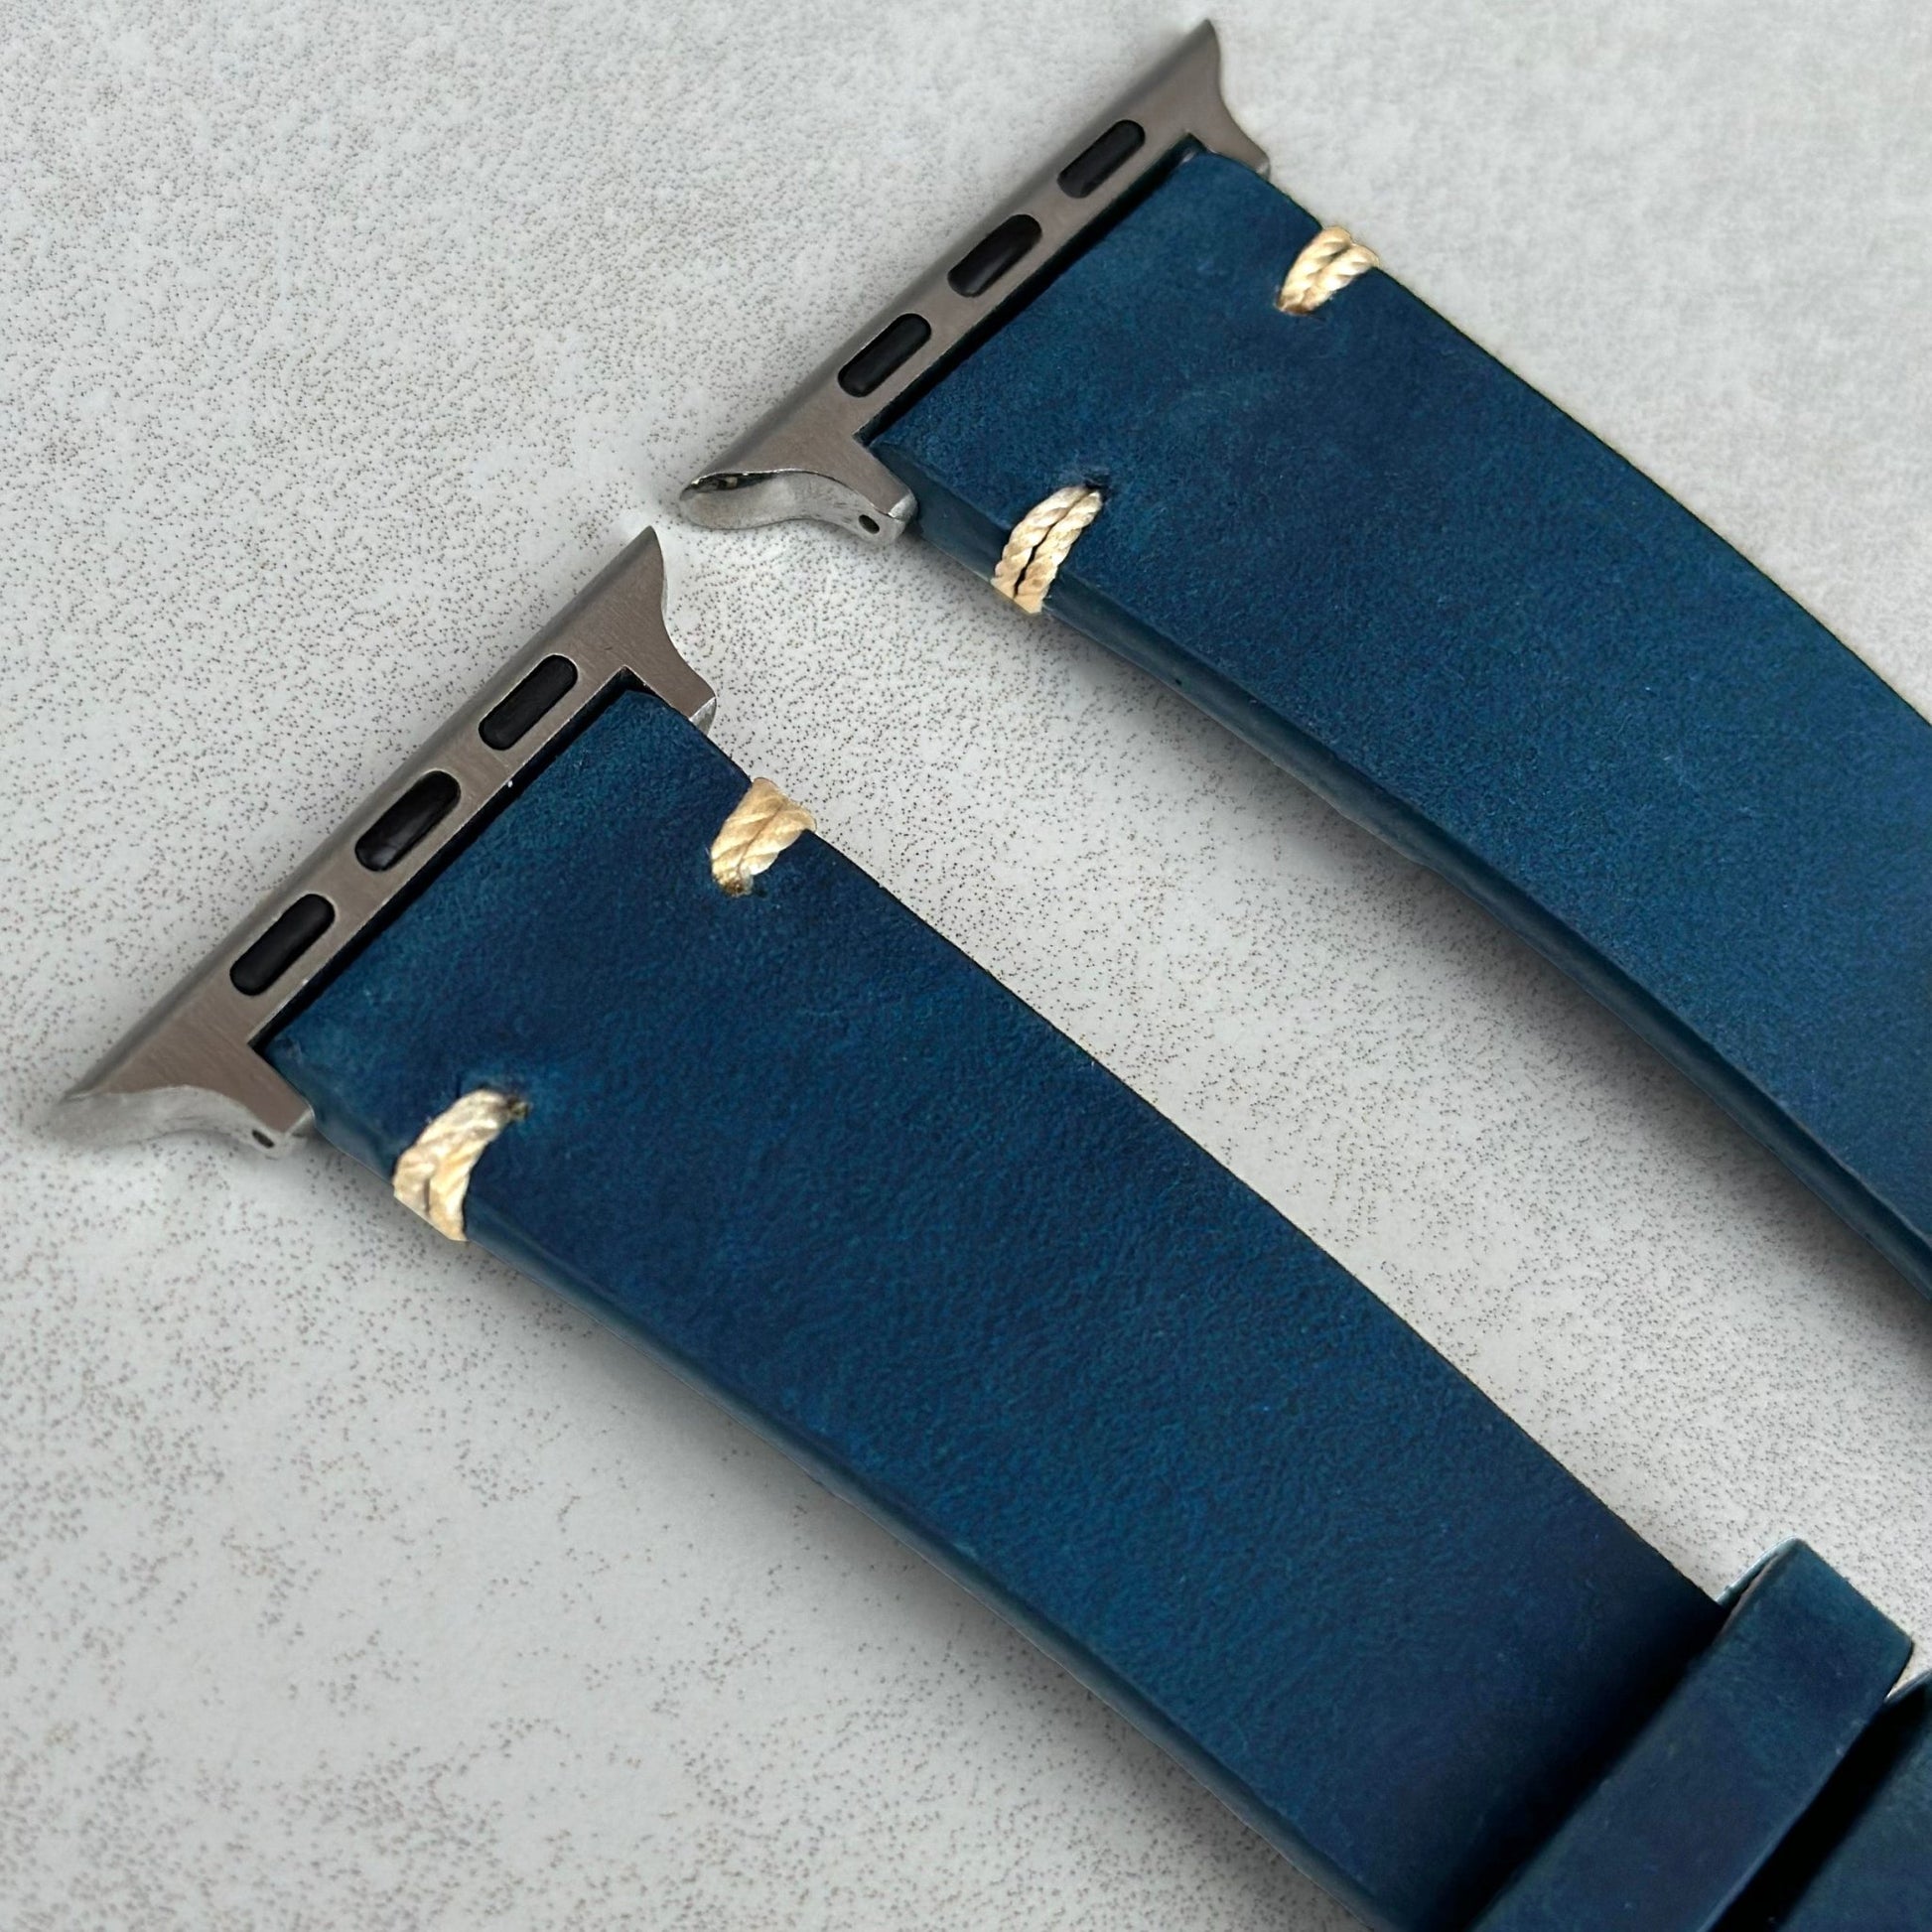 Top of the Madrid blue full grain leather Apple Watch strap. Contrast ivory stitching. Watch And Strap.